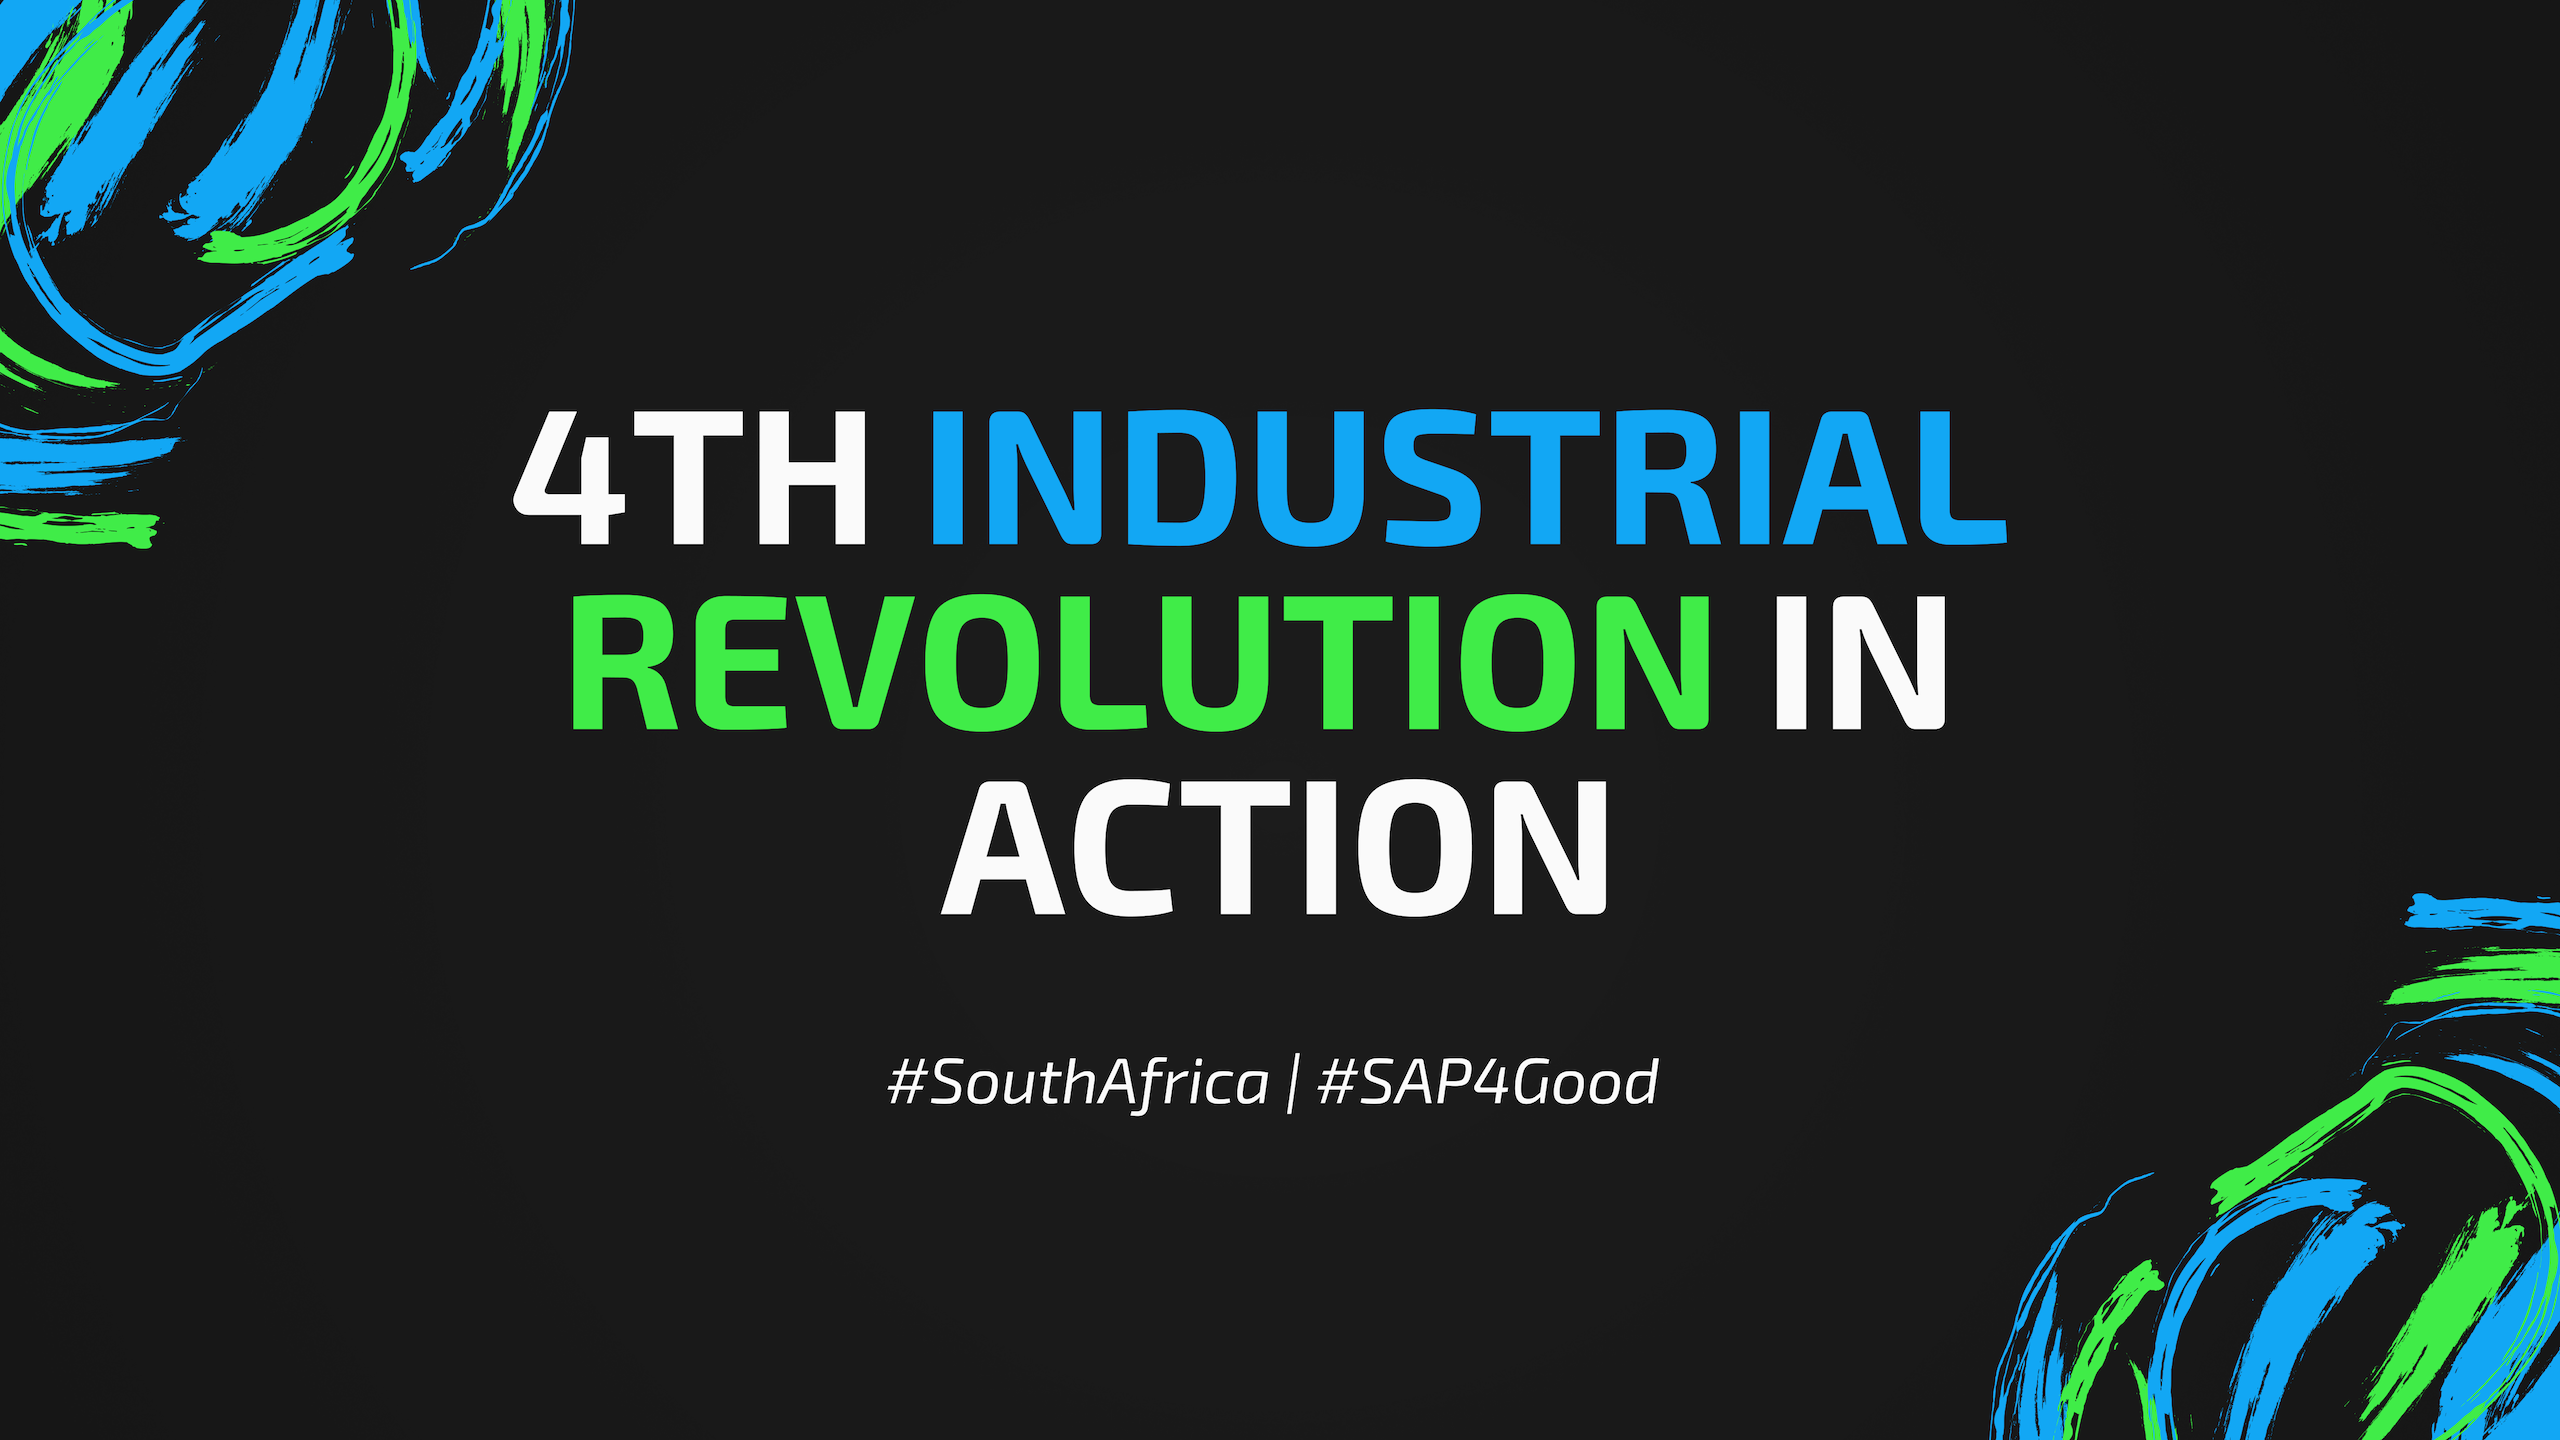 4th Industrial Revolution in Action – Building Cyber Centres in #SouthAfrica